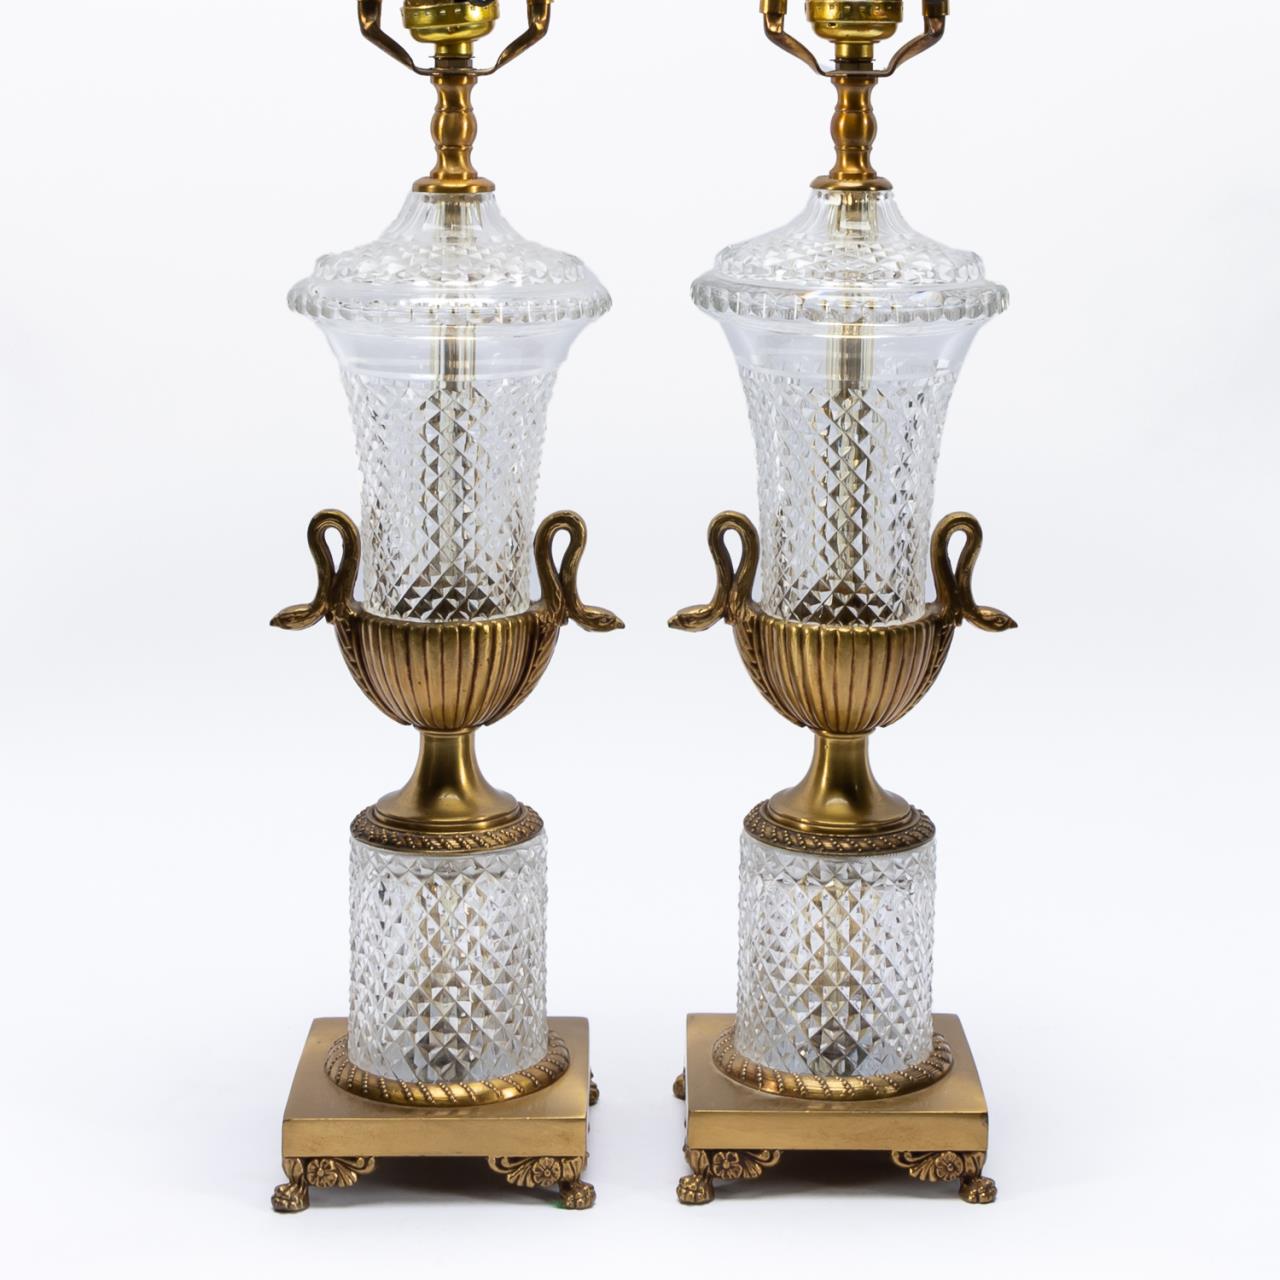 PAIR, EMPIRE-STYLE BRONZE MOUNTED